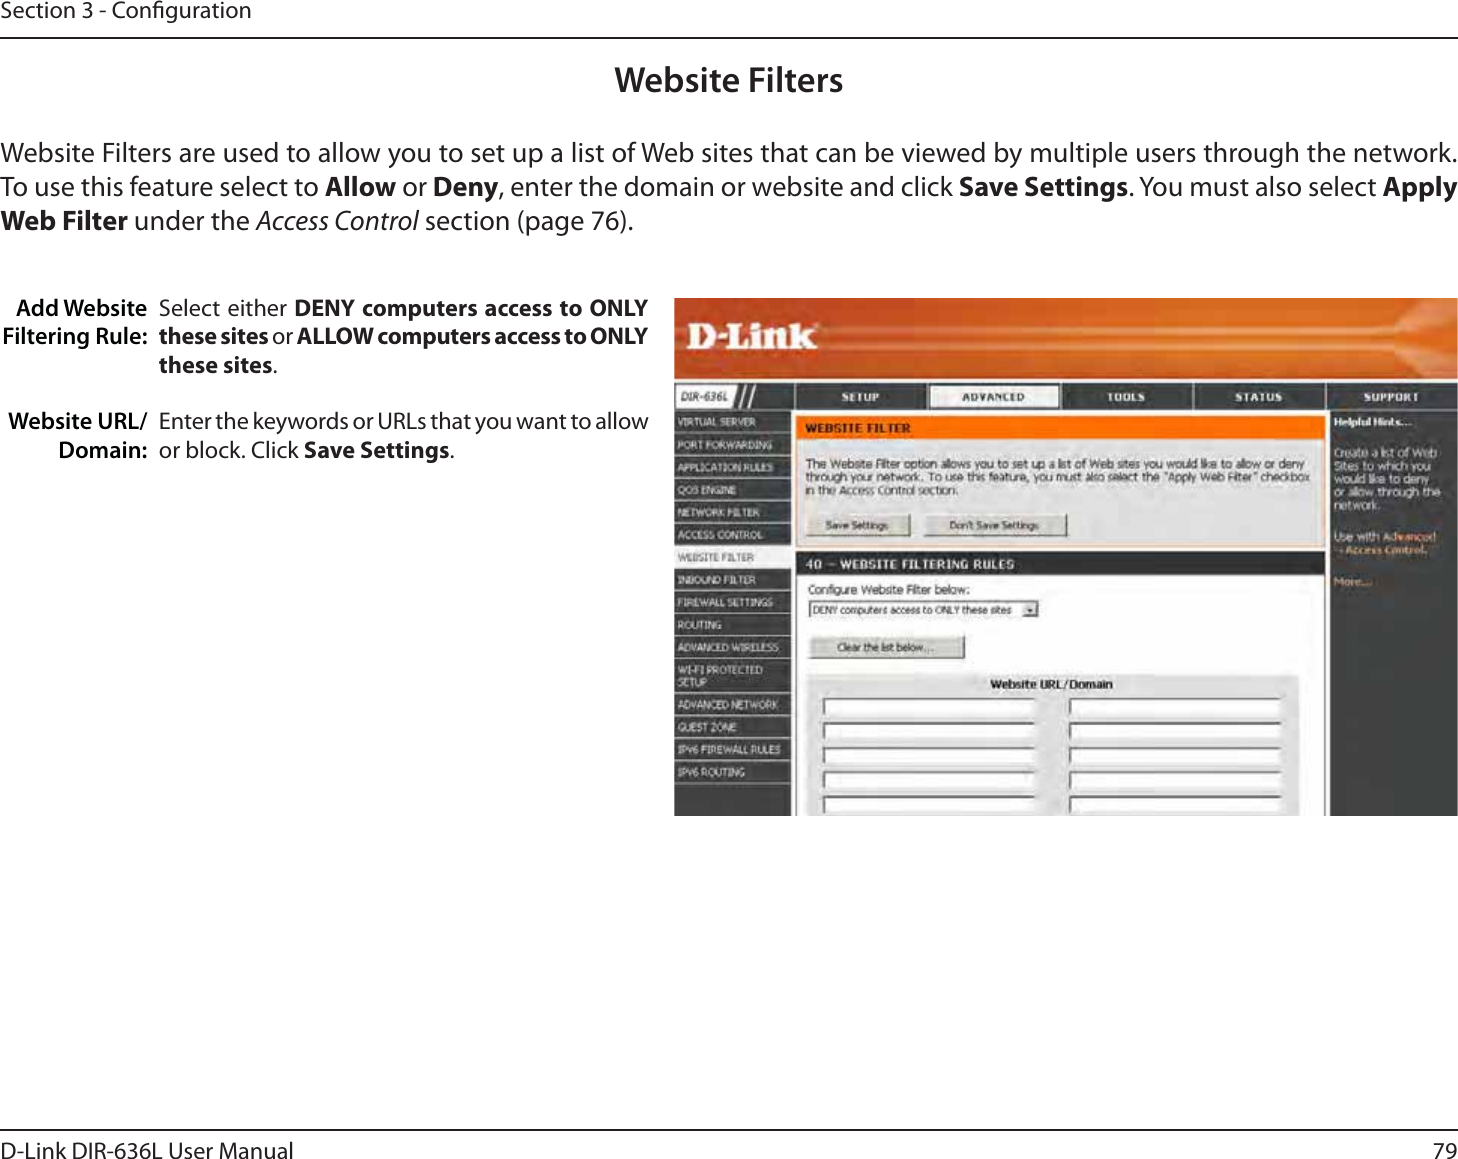 79D-Link DIR-636L User ManualSection 3 - CongurationAdd Website Filtering Rule:Website URL/Domain:Website FiltersSelect either DENY computers access to ONLY these sites or ALLOW computers access to ONLY these sites.Enter the keywords or URLs that you want to allow or block. Click Save Settings.Website Filters are used to allow you to set up a list of Web sites that can be viewed by multiple users through the network. To use this feature select to Allow or Deny, enter the domain or website and click Save Settings. You must also select Apply Web Filter under the Access Control section (page 76).